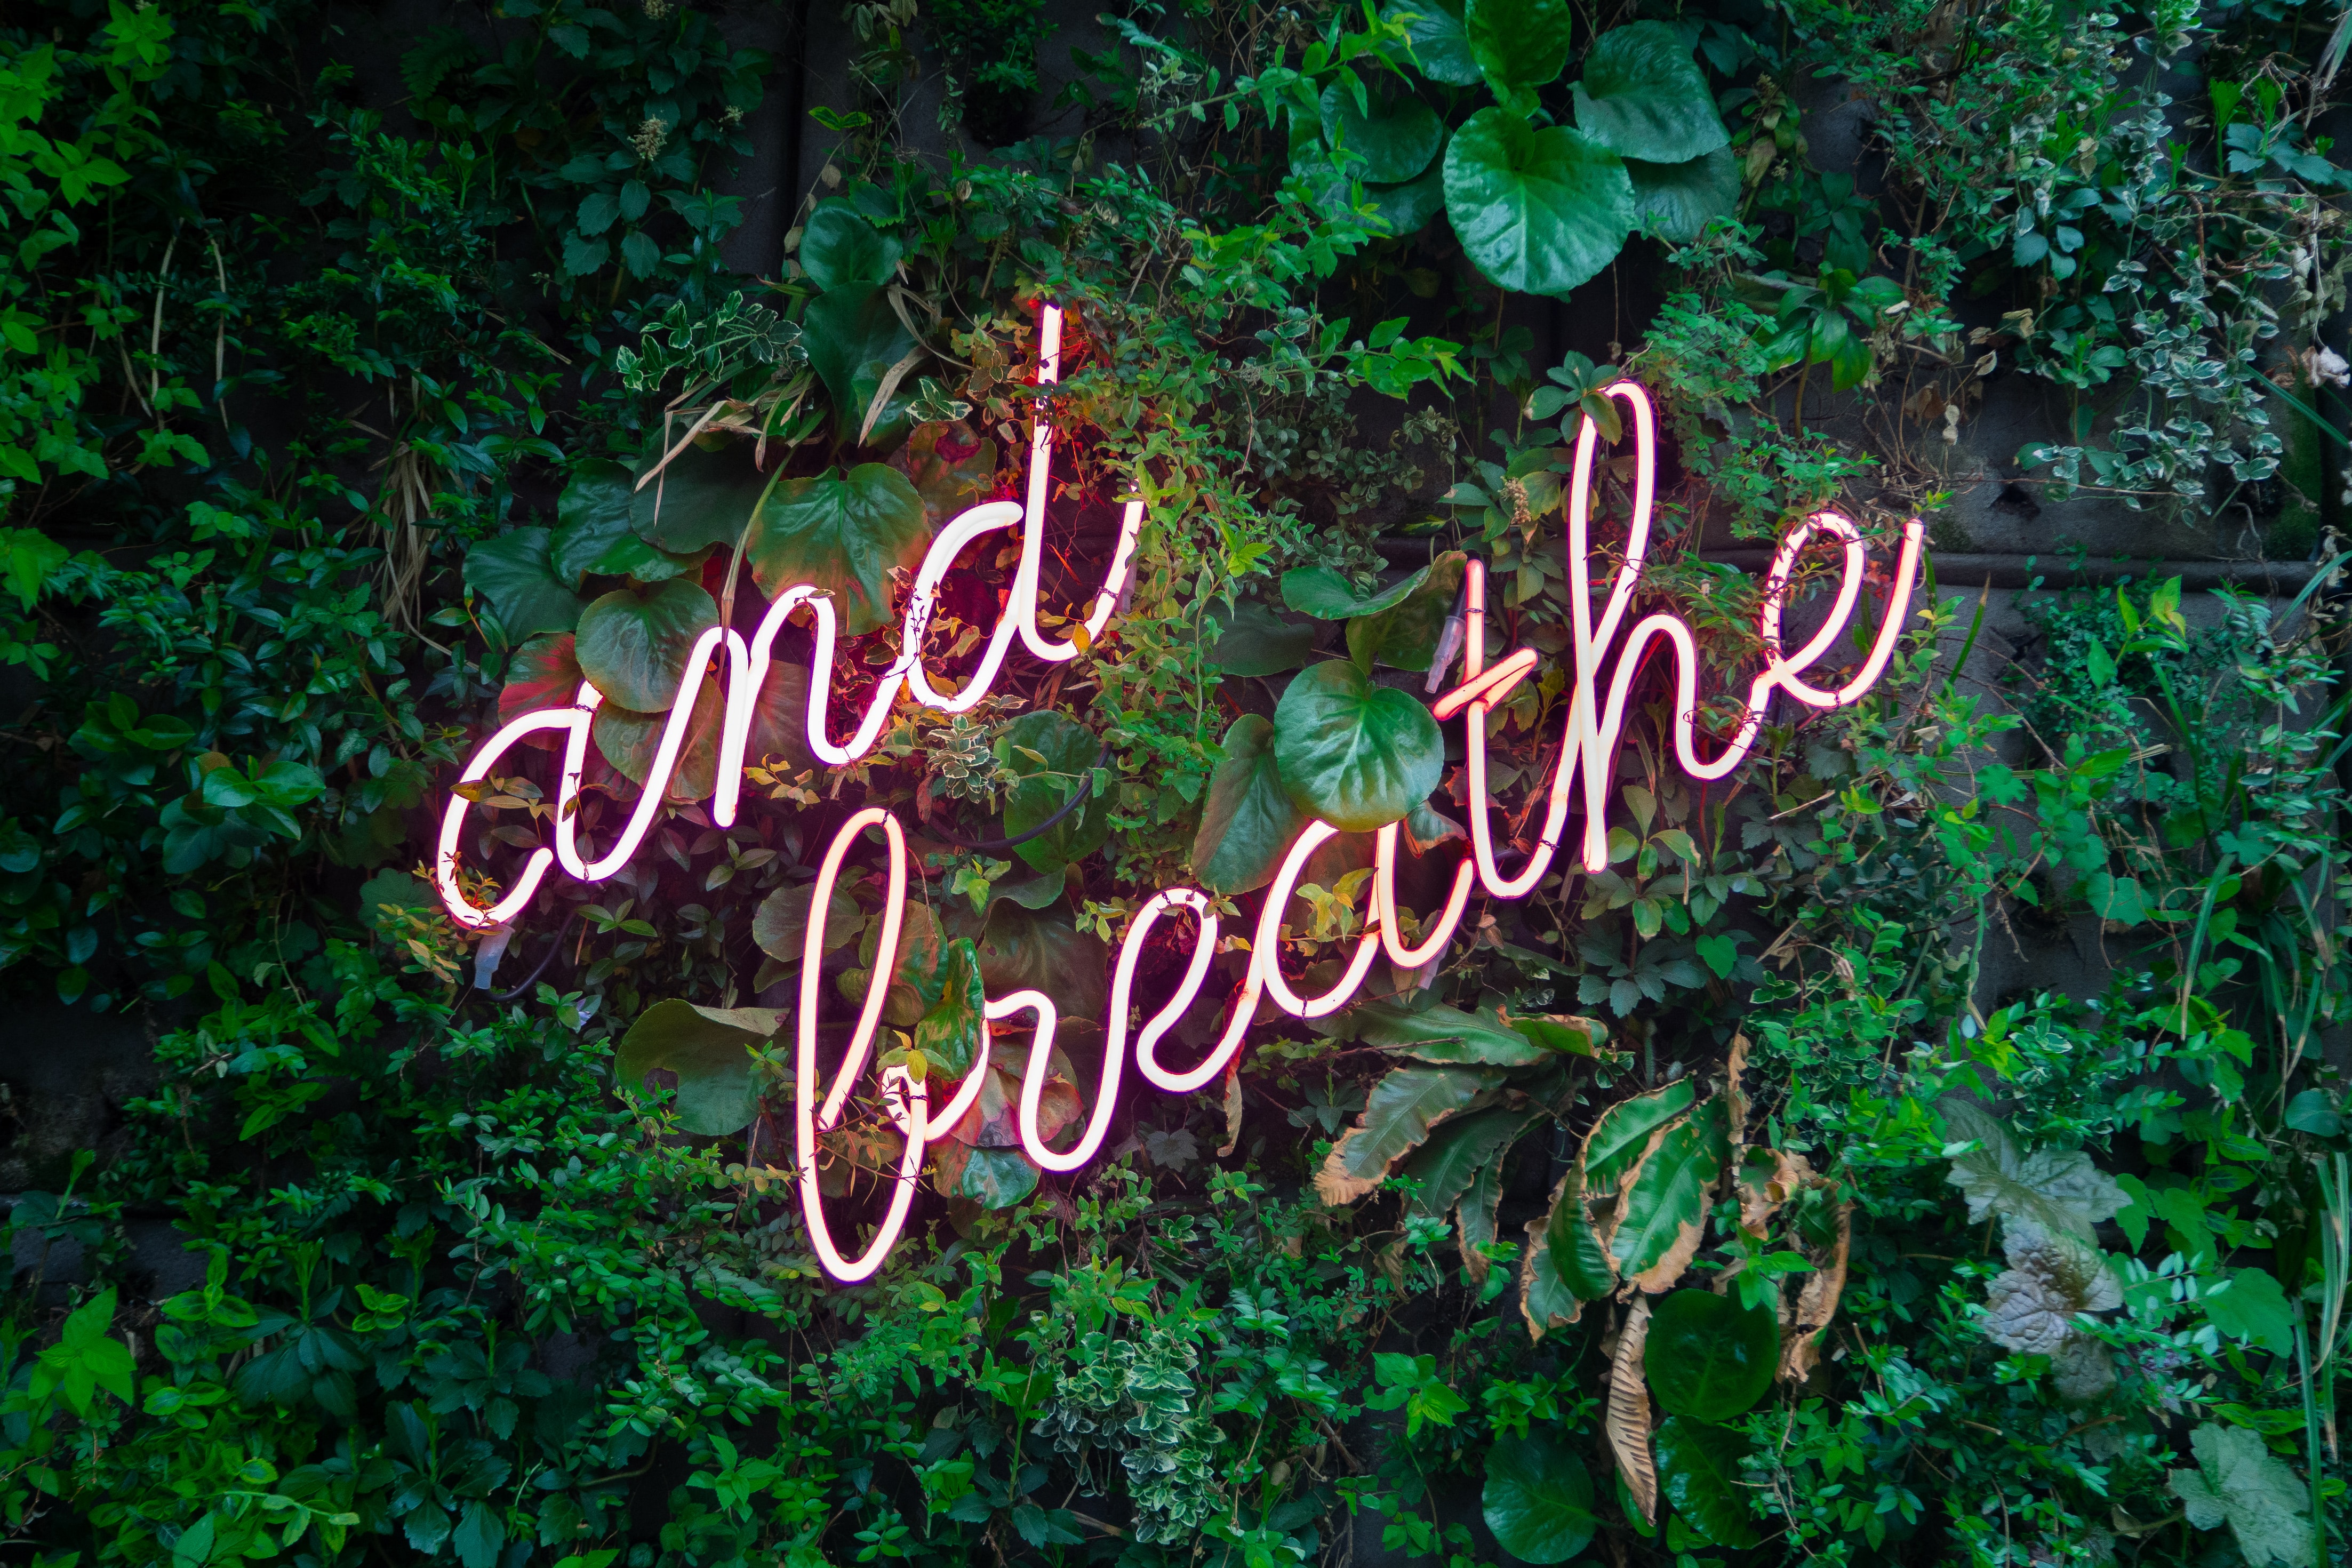 "and breathe" neon sign.